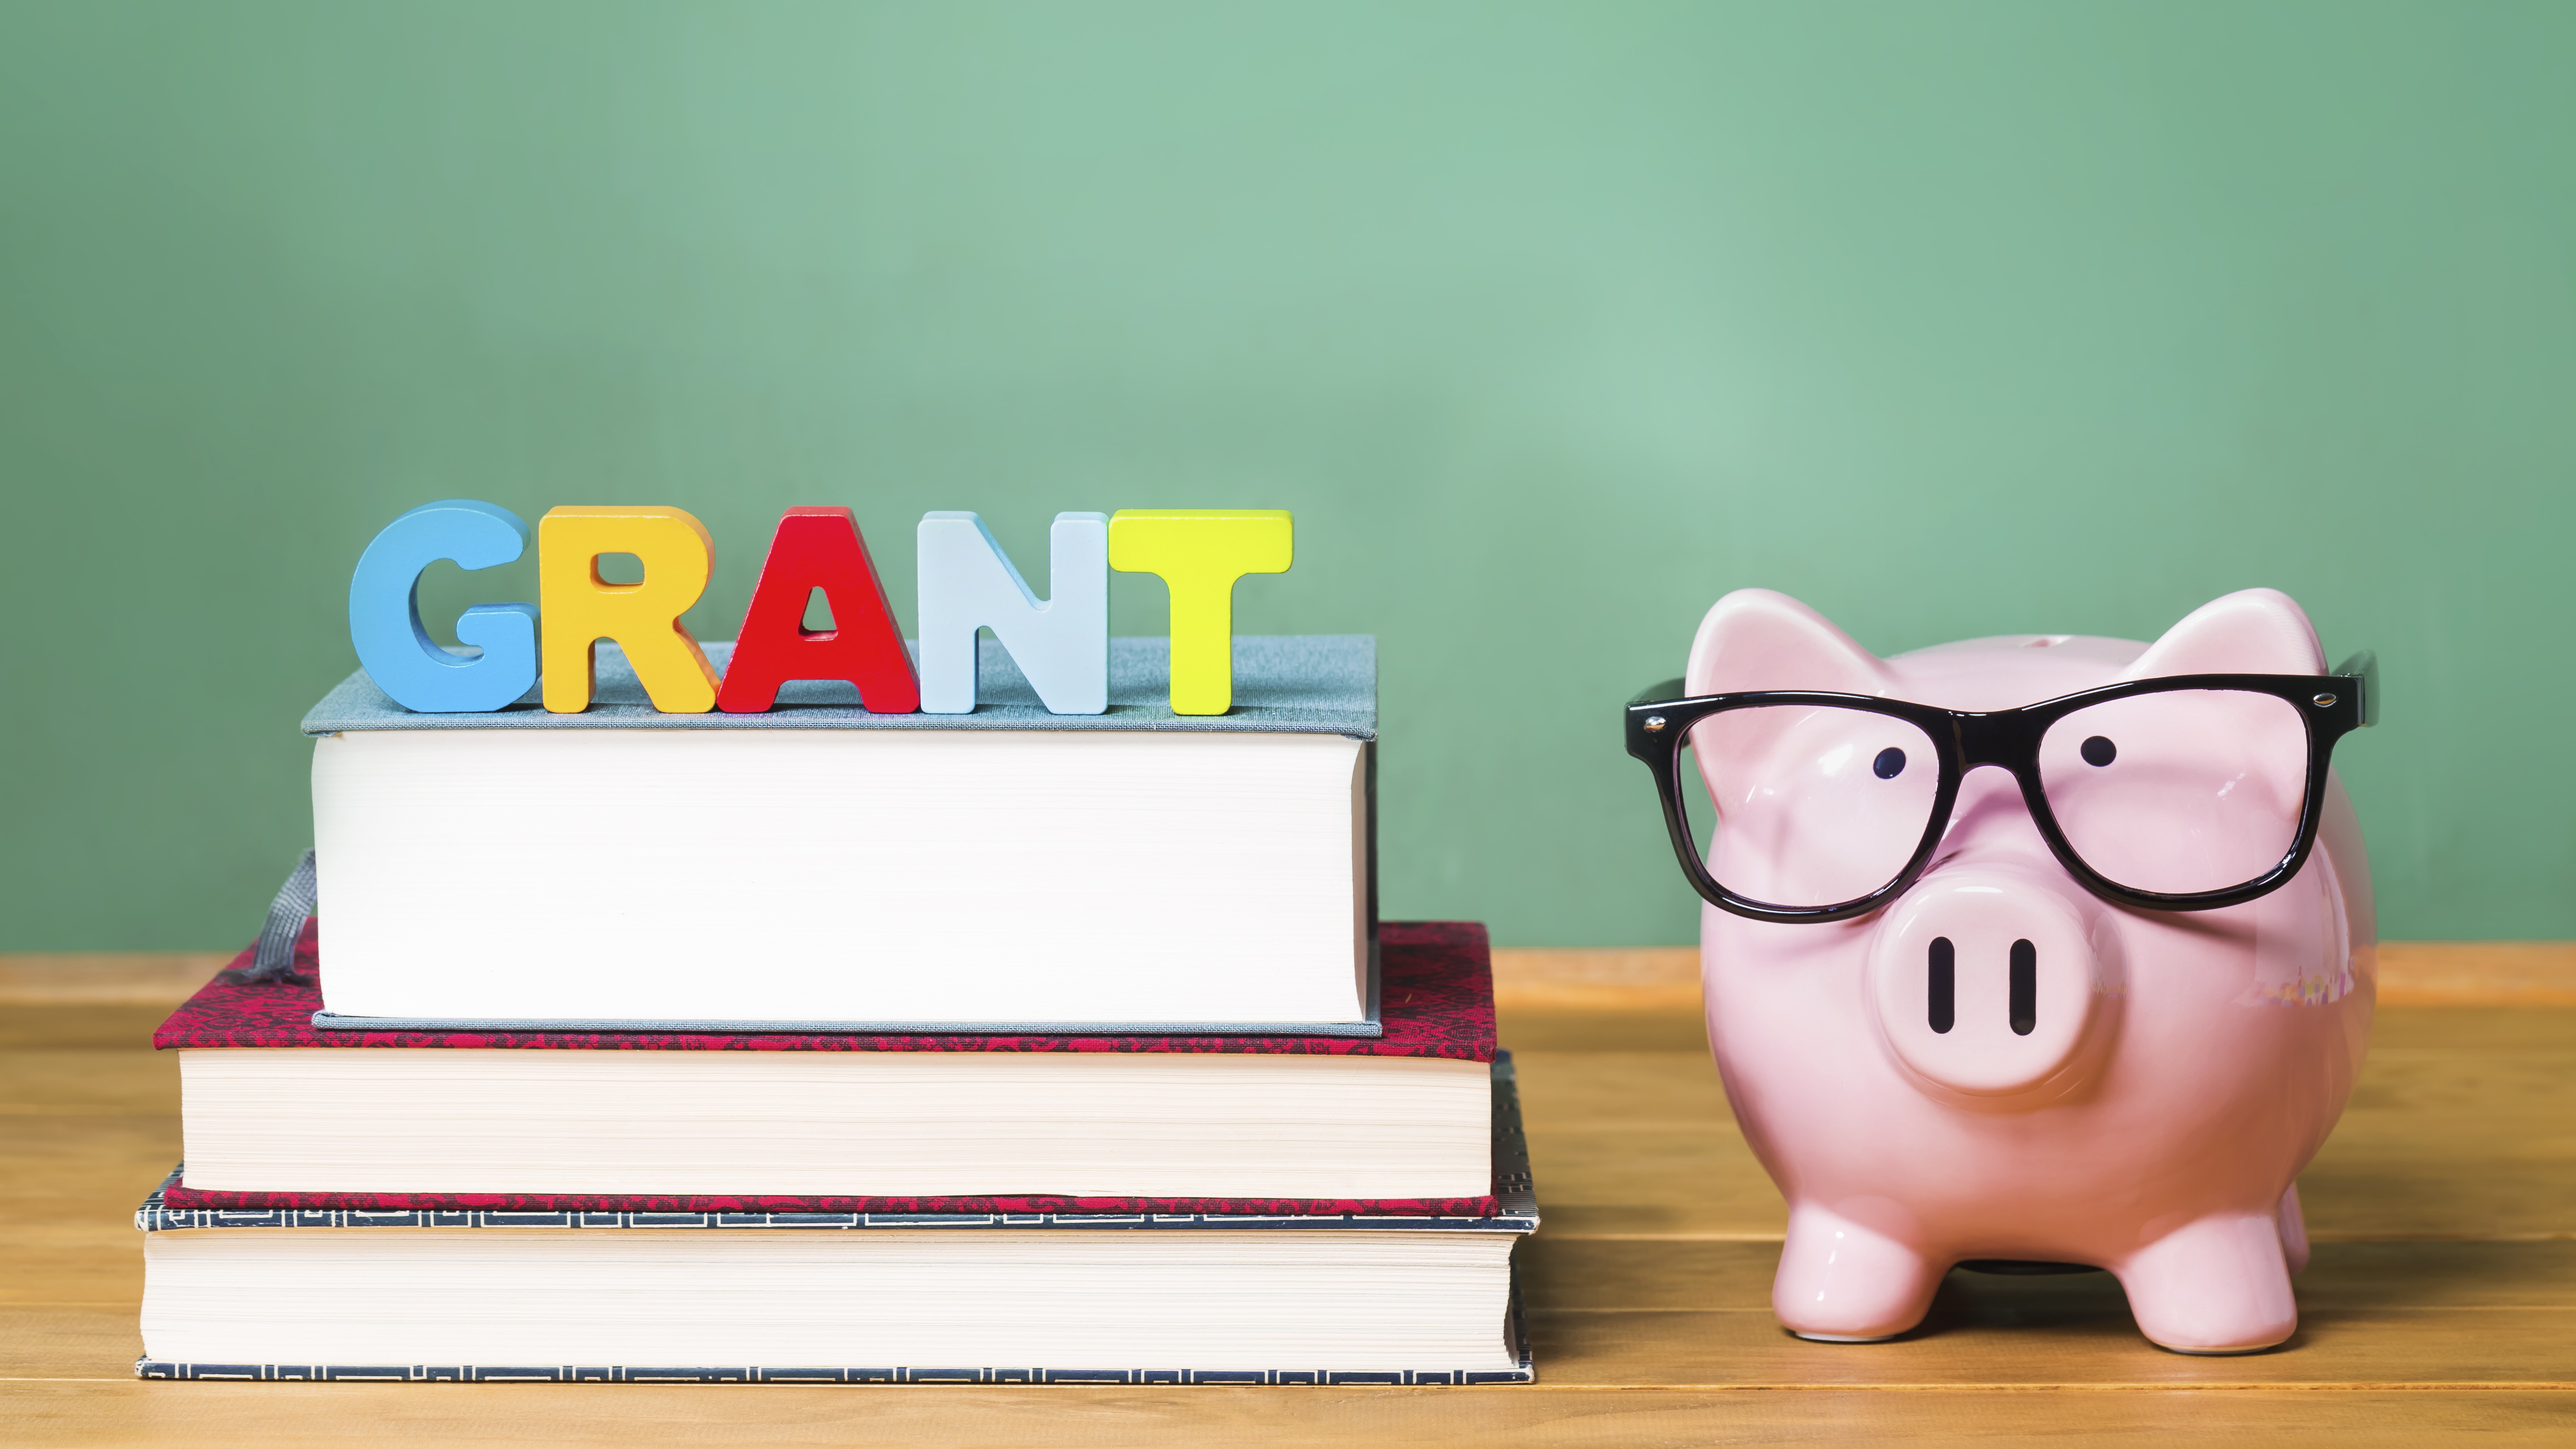 The word grant is spelled out in children's letters on top of schools books and a piggy bank with eyeglasses next to it.